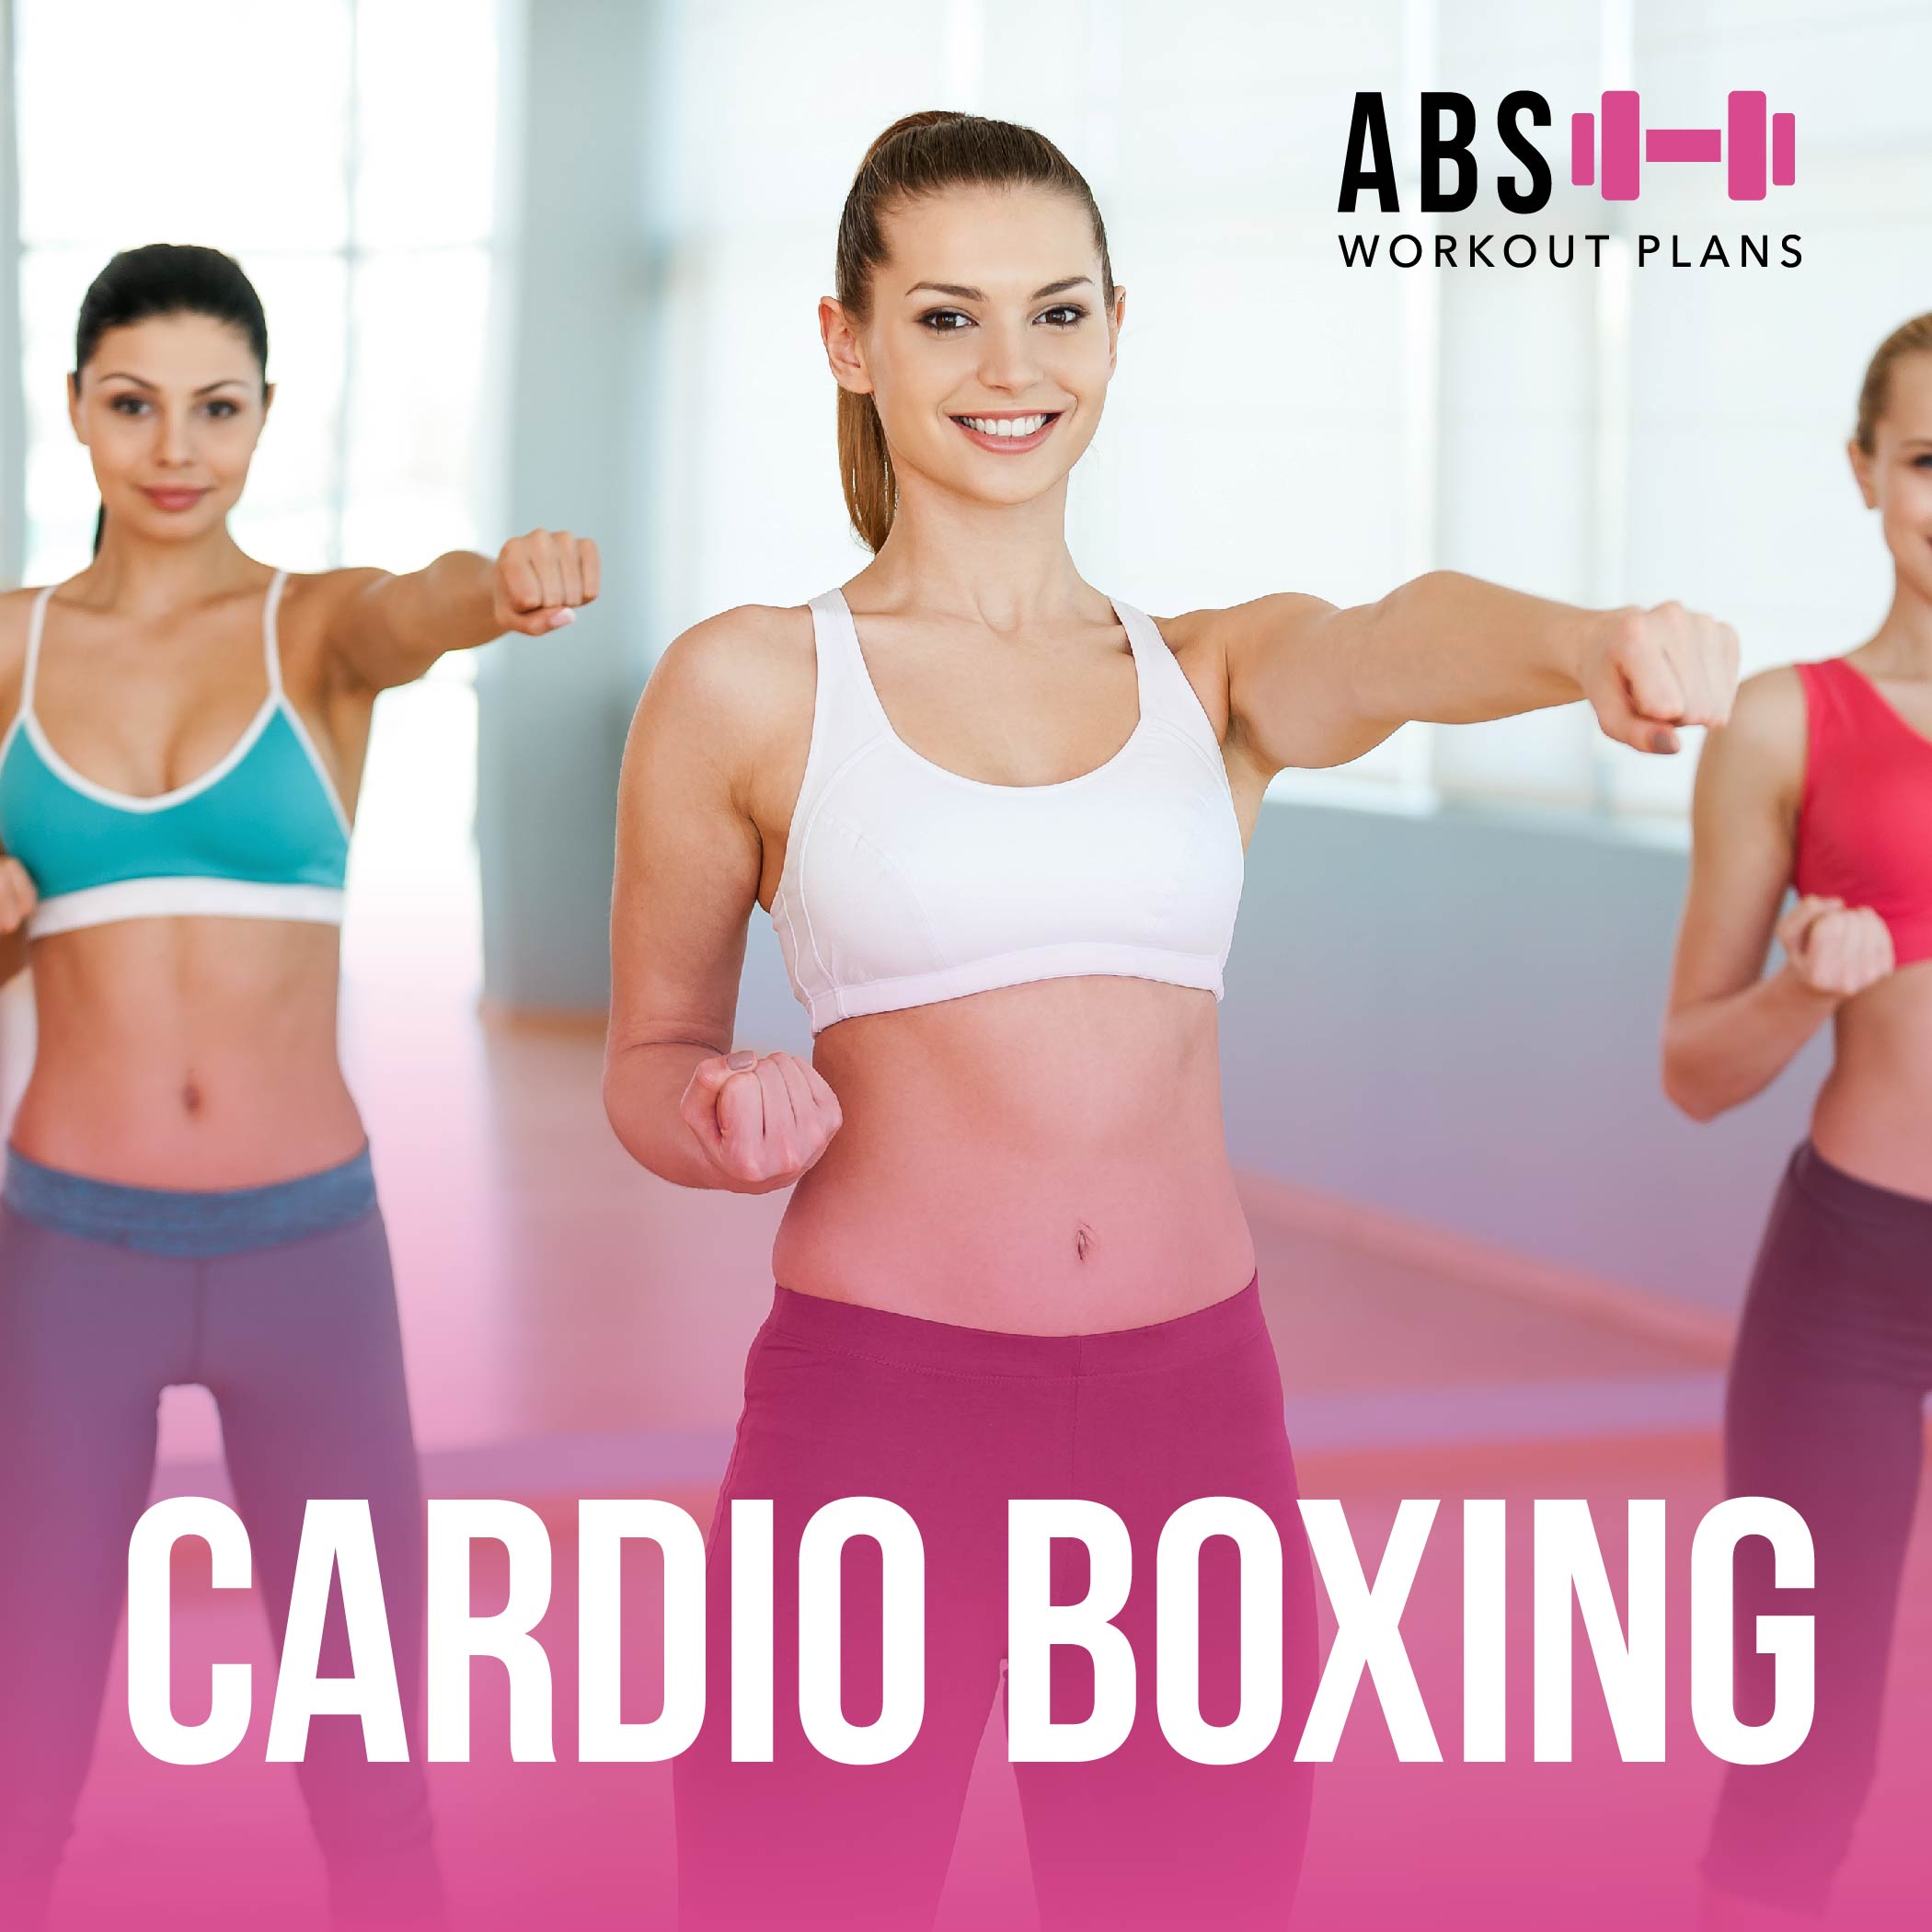 CARDIO BOXING AT ABSWORKOUTPLANS